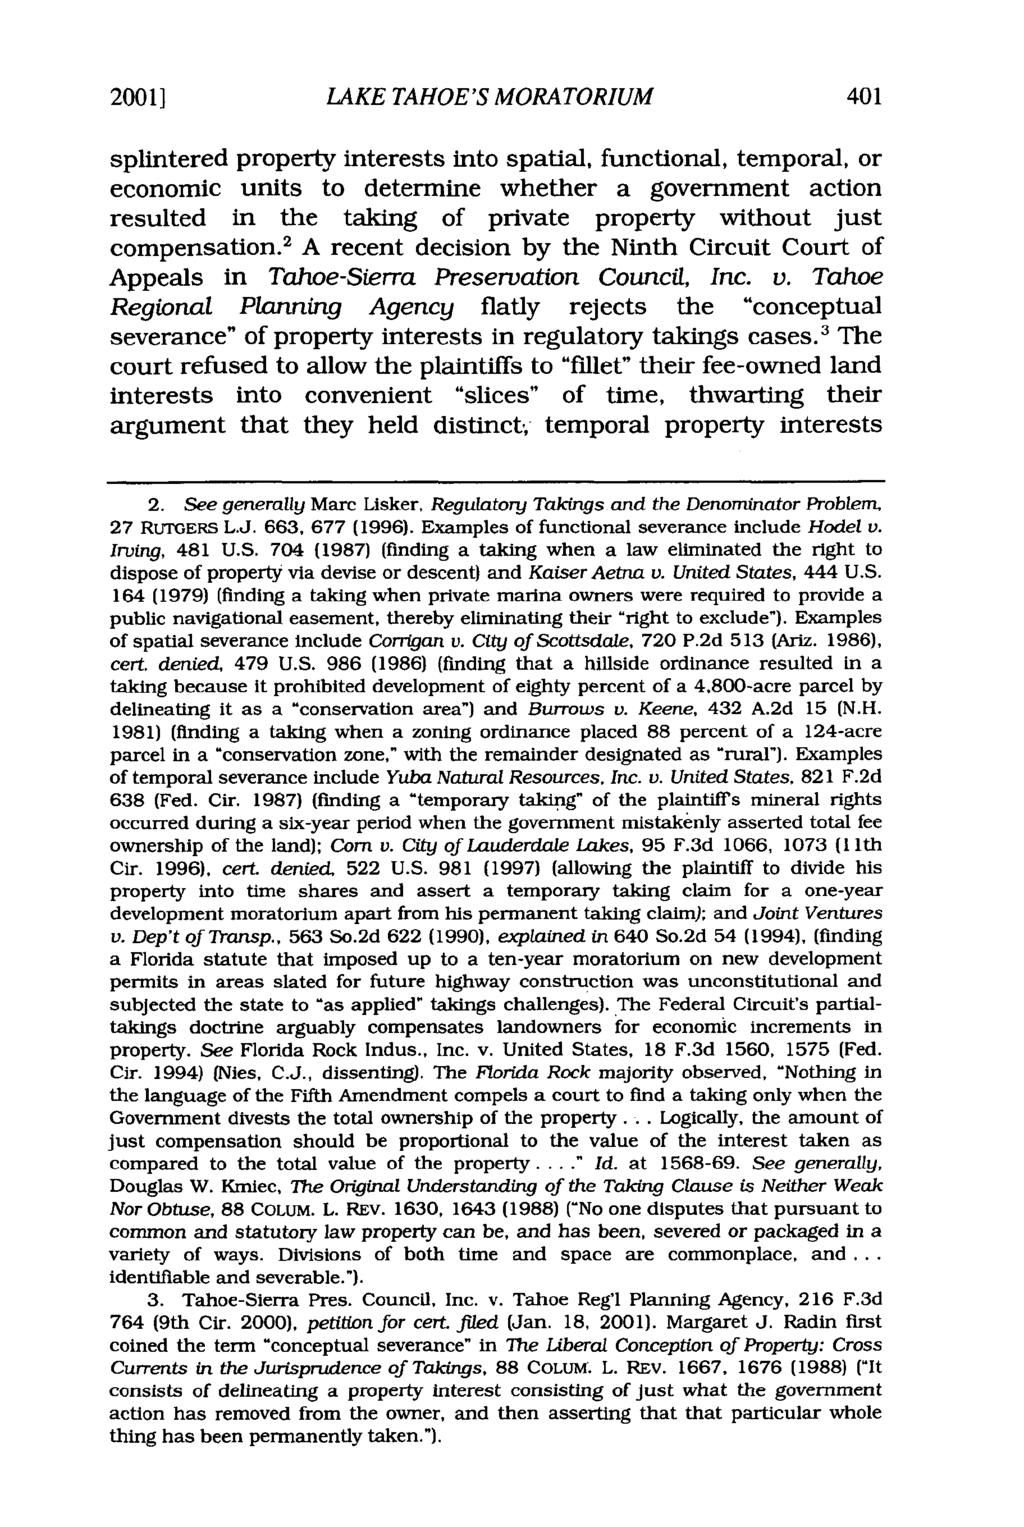 2001] LAKE TAHOE'S MORATORIUM splintered property interests into spatial, functional, temporal, or economic units to determine whether a government action resulted in the taking of private property